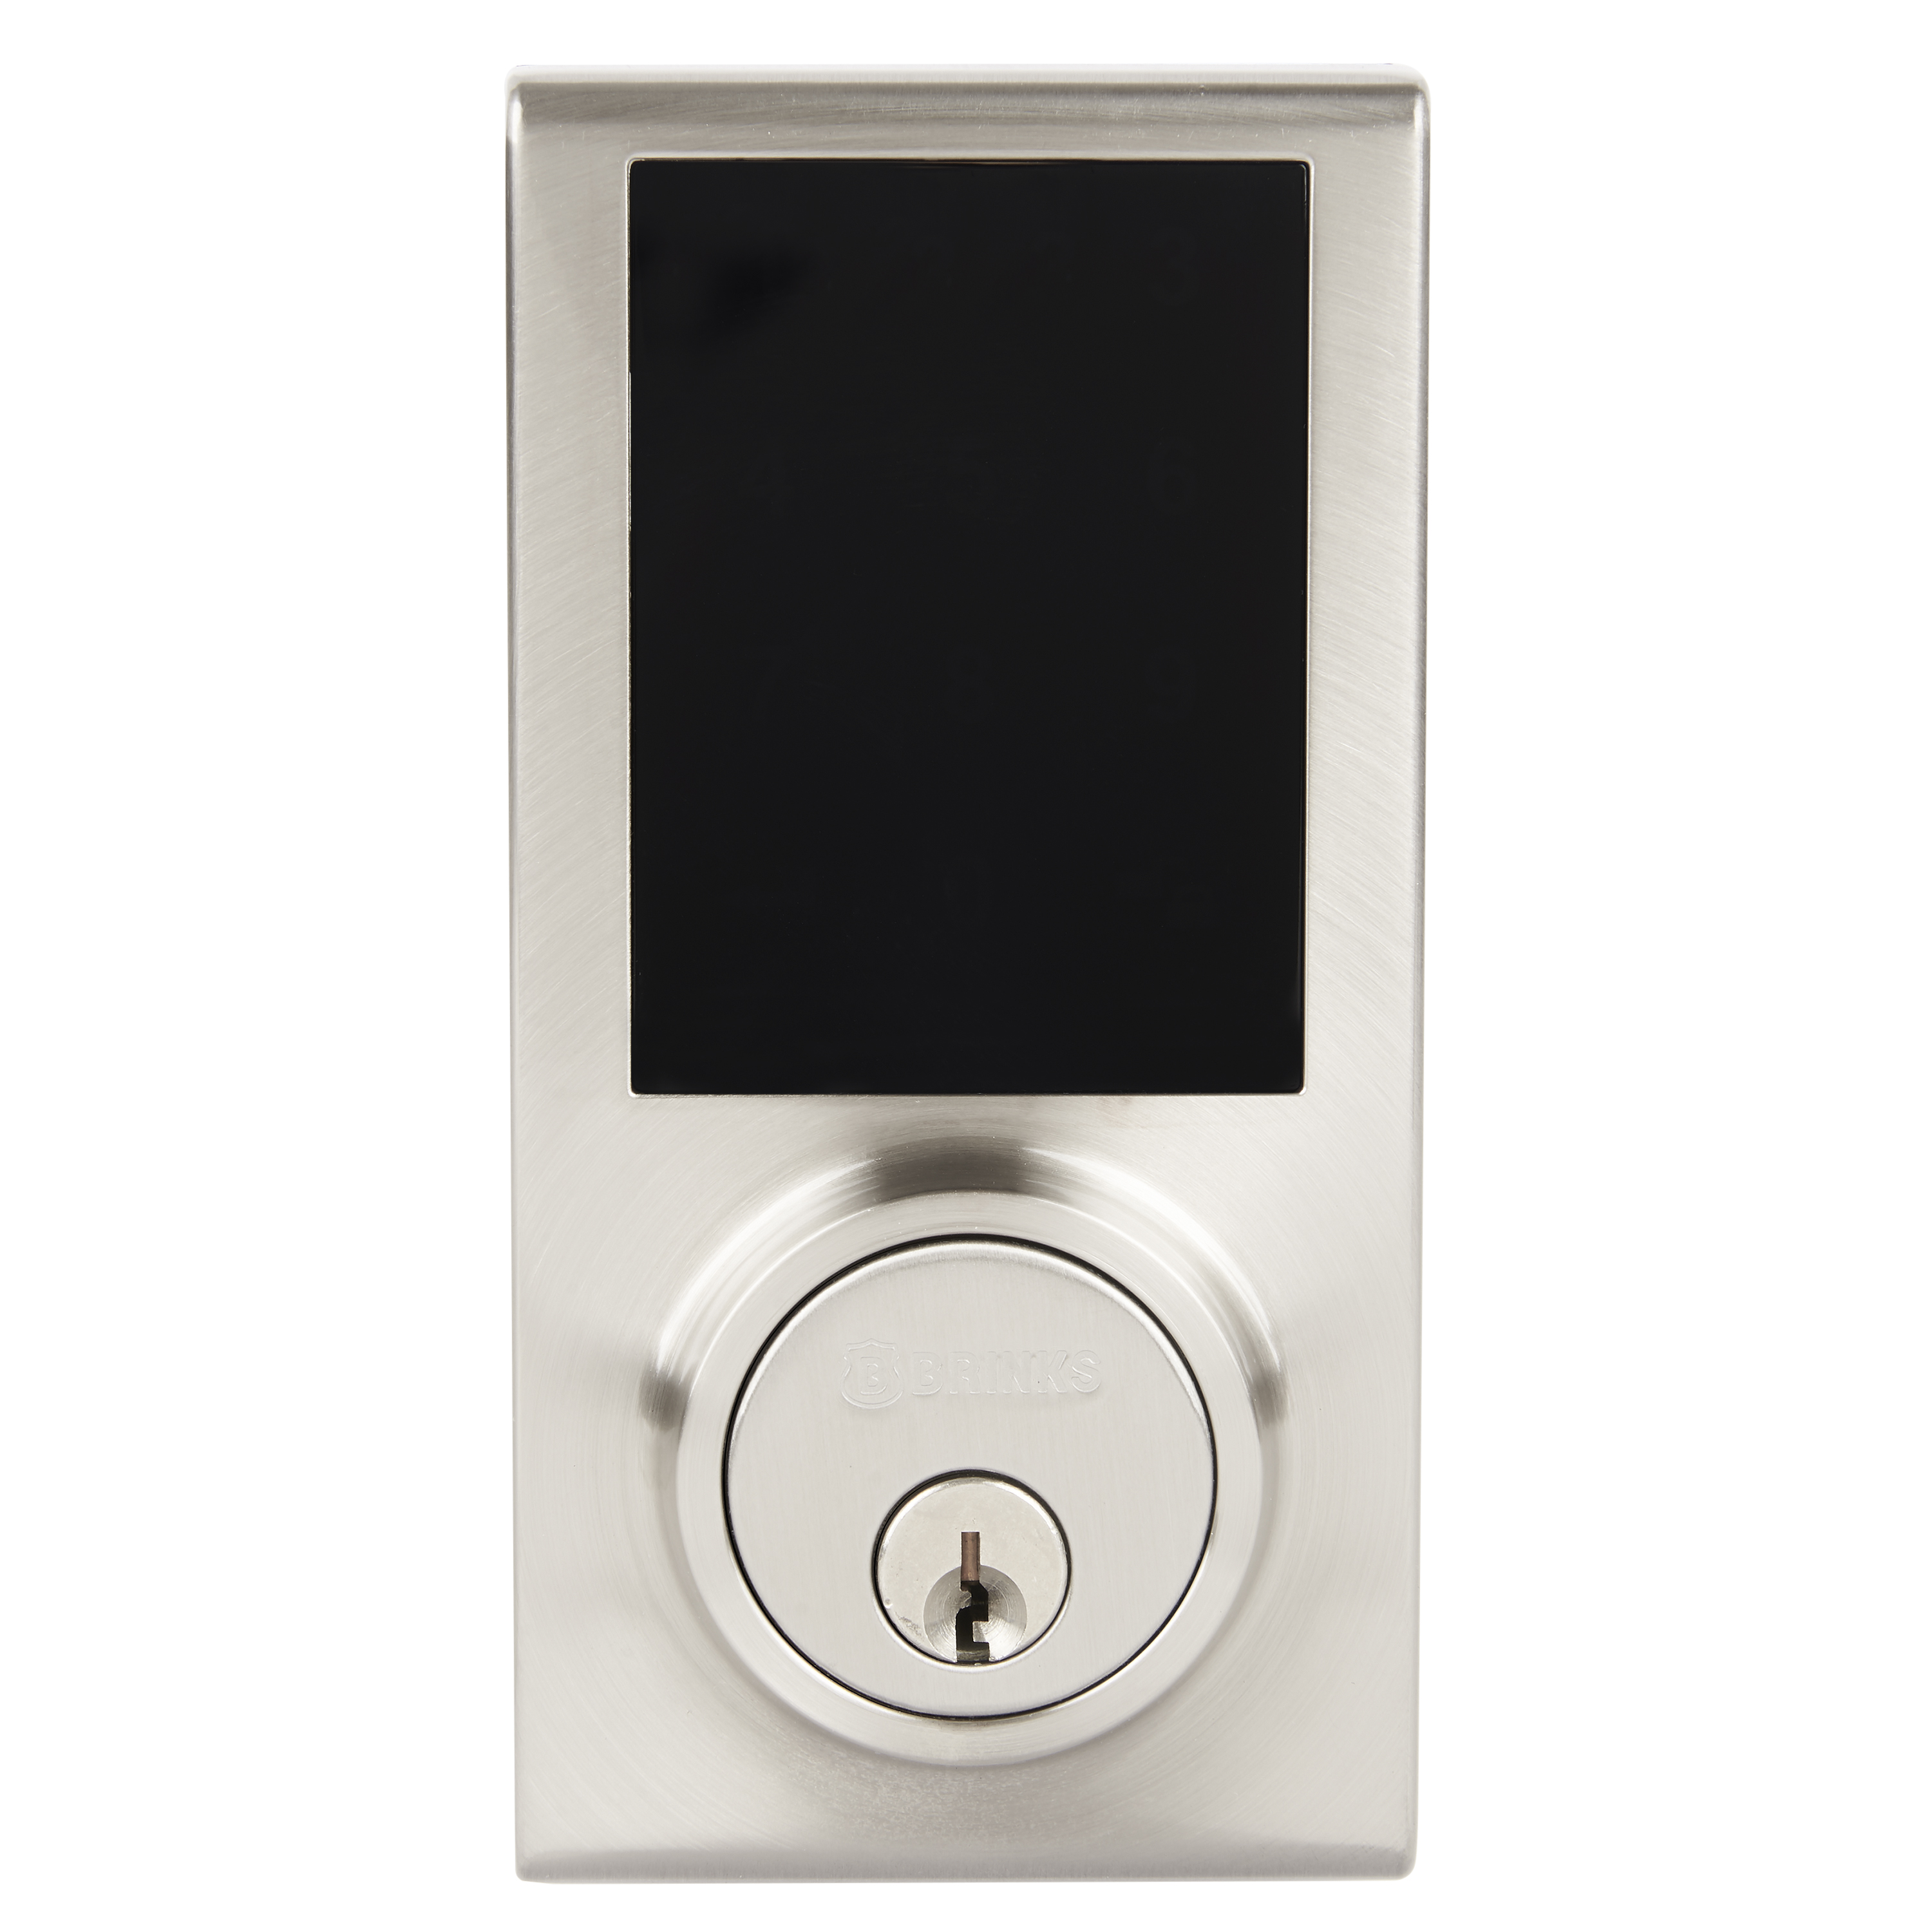 Brinks, Keyed Entry Satin Nickel Electronic Touchscreen Deadbolt - image 5 of 16